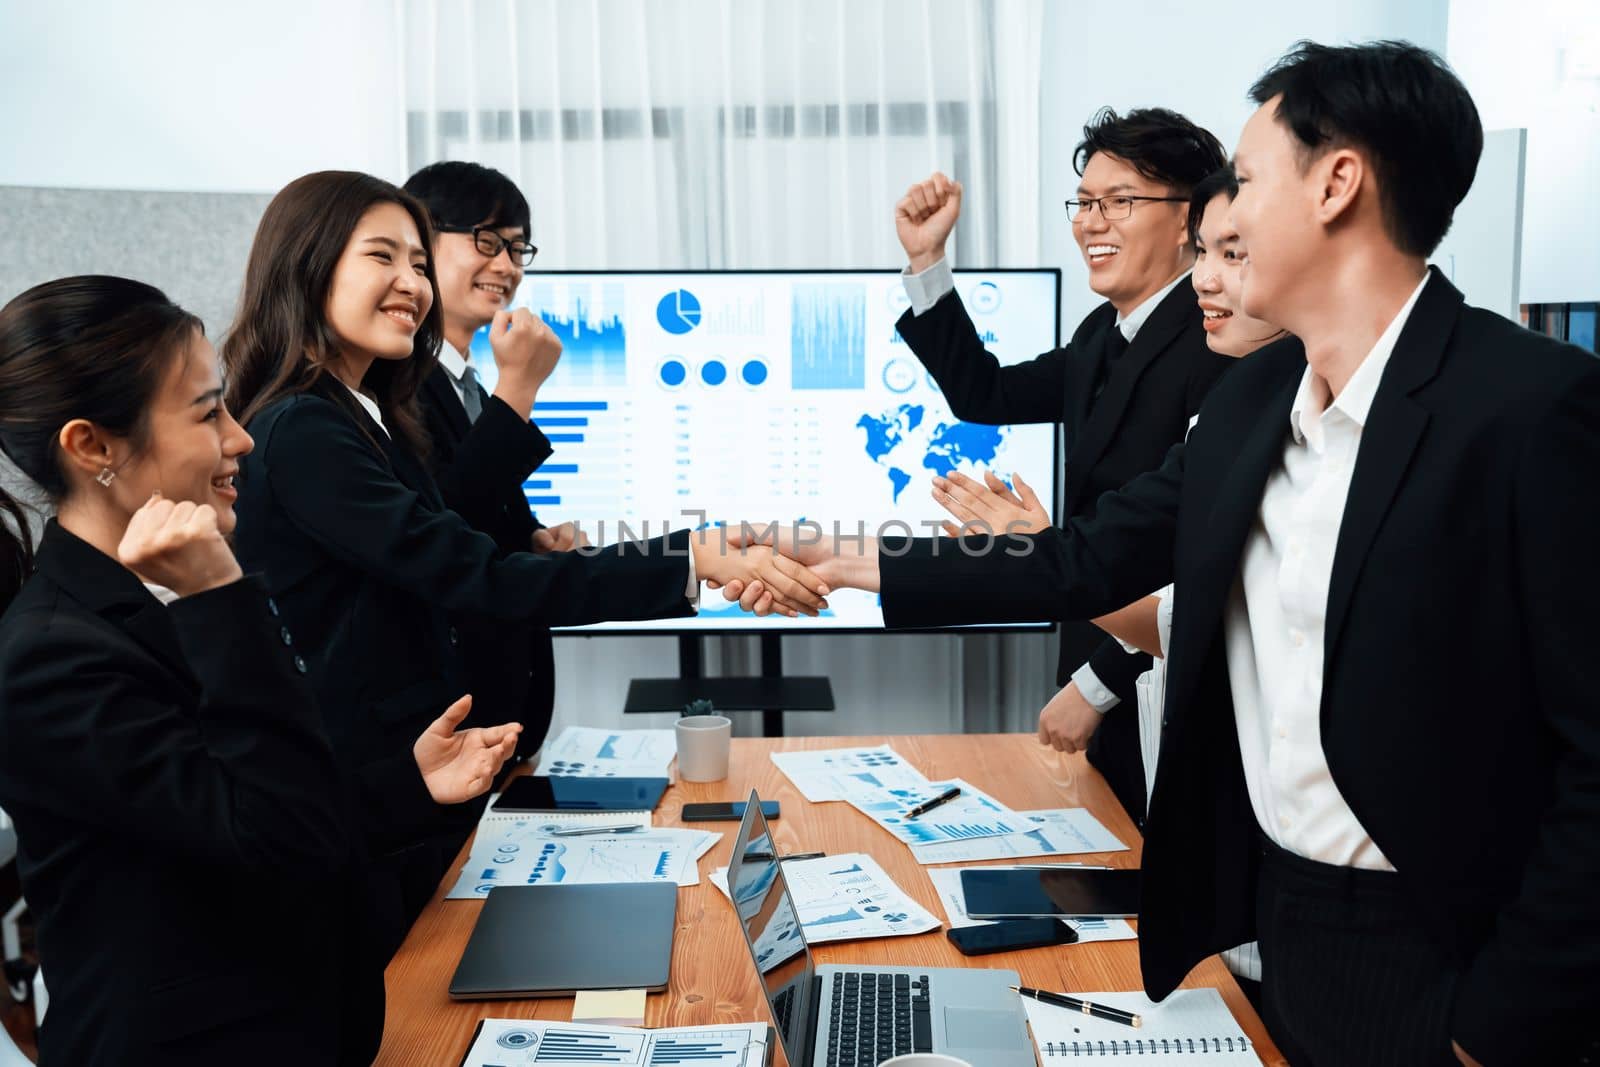 Businesspeople shake hand after successful agreement or meeting. Office worker colleague handshake with business team leader manager for strong teamwork in office to promote harmony and unity concept.